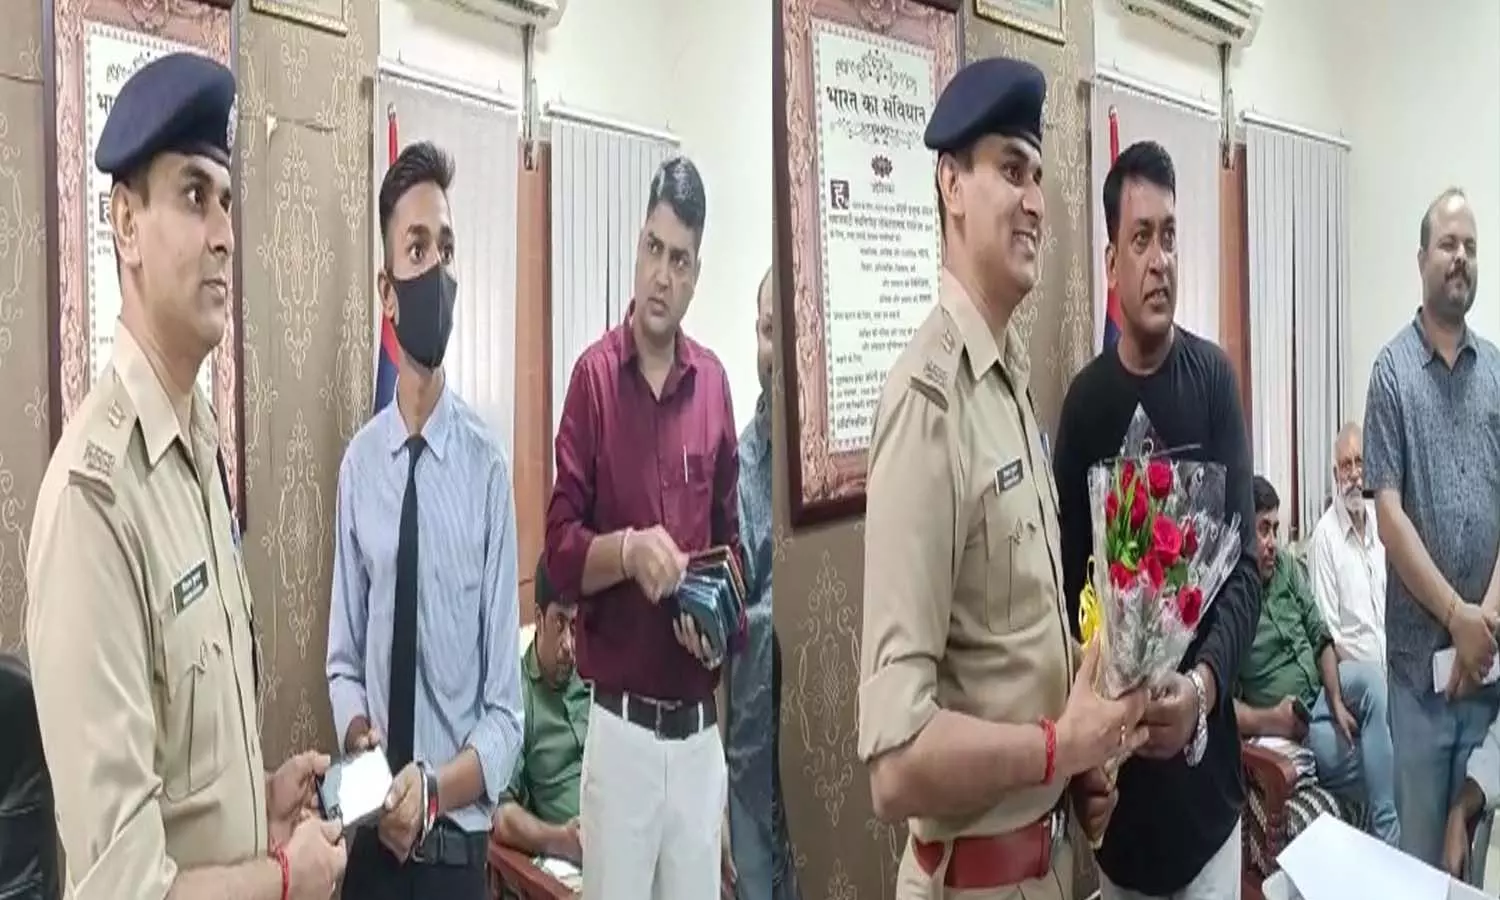 Peoples faces were happy after getting mobile, SP City said Thank you